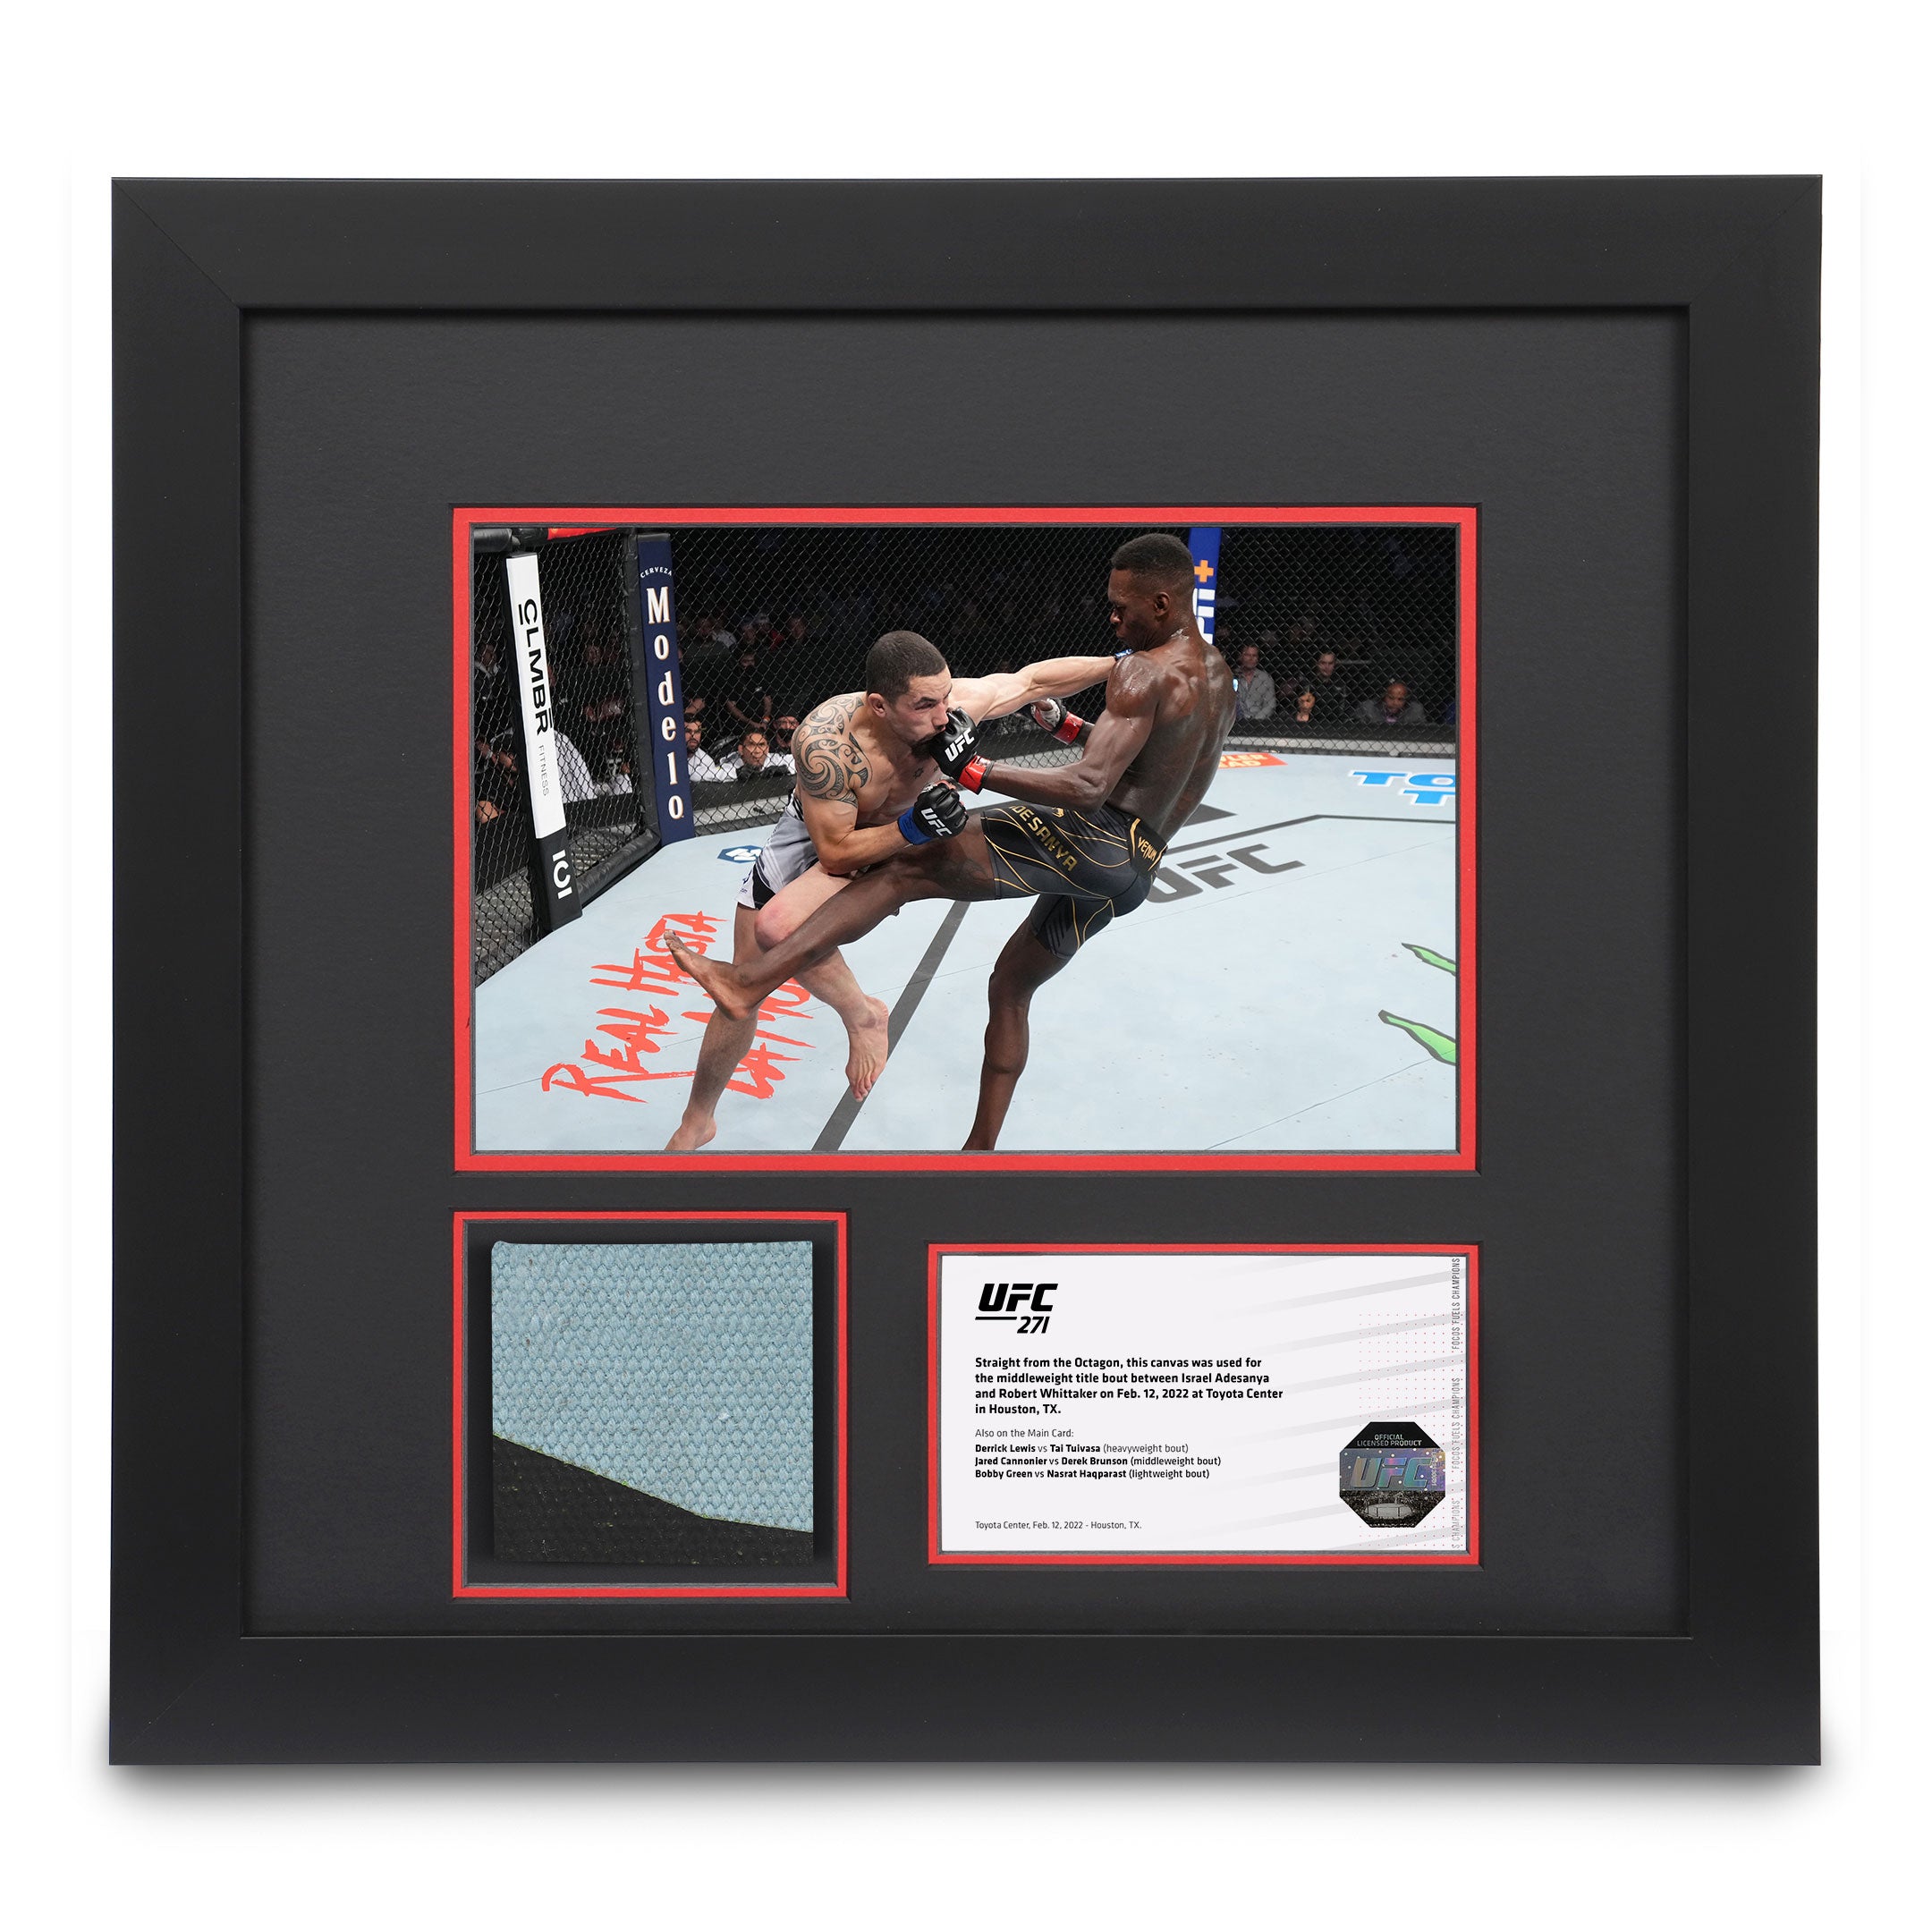 Canvas & Photo from the Adesanya vs Whittaker 2 UFC 271 event 